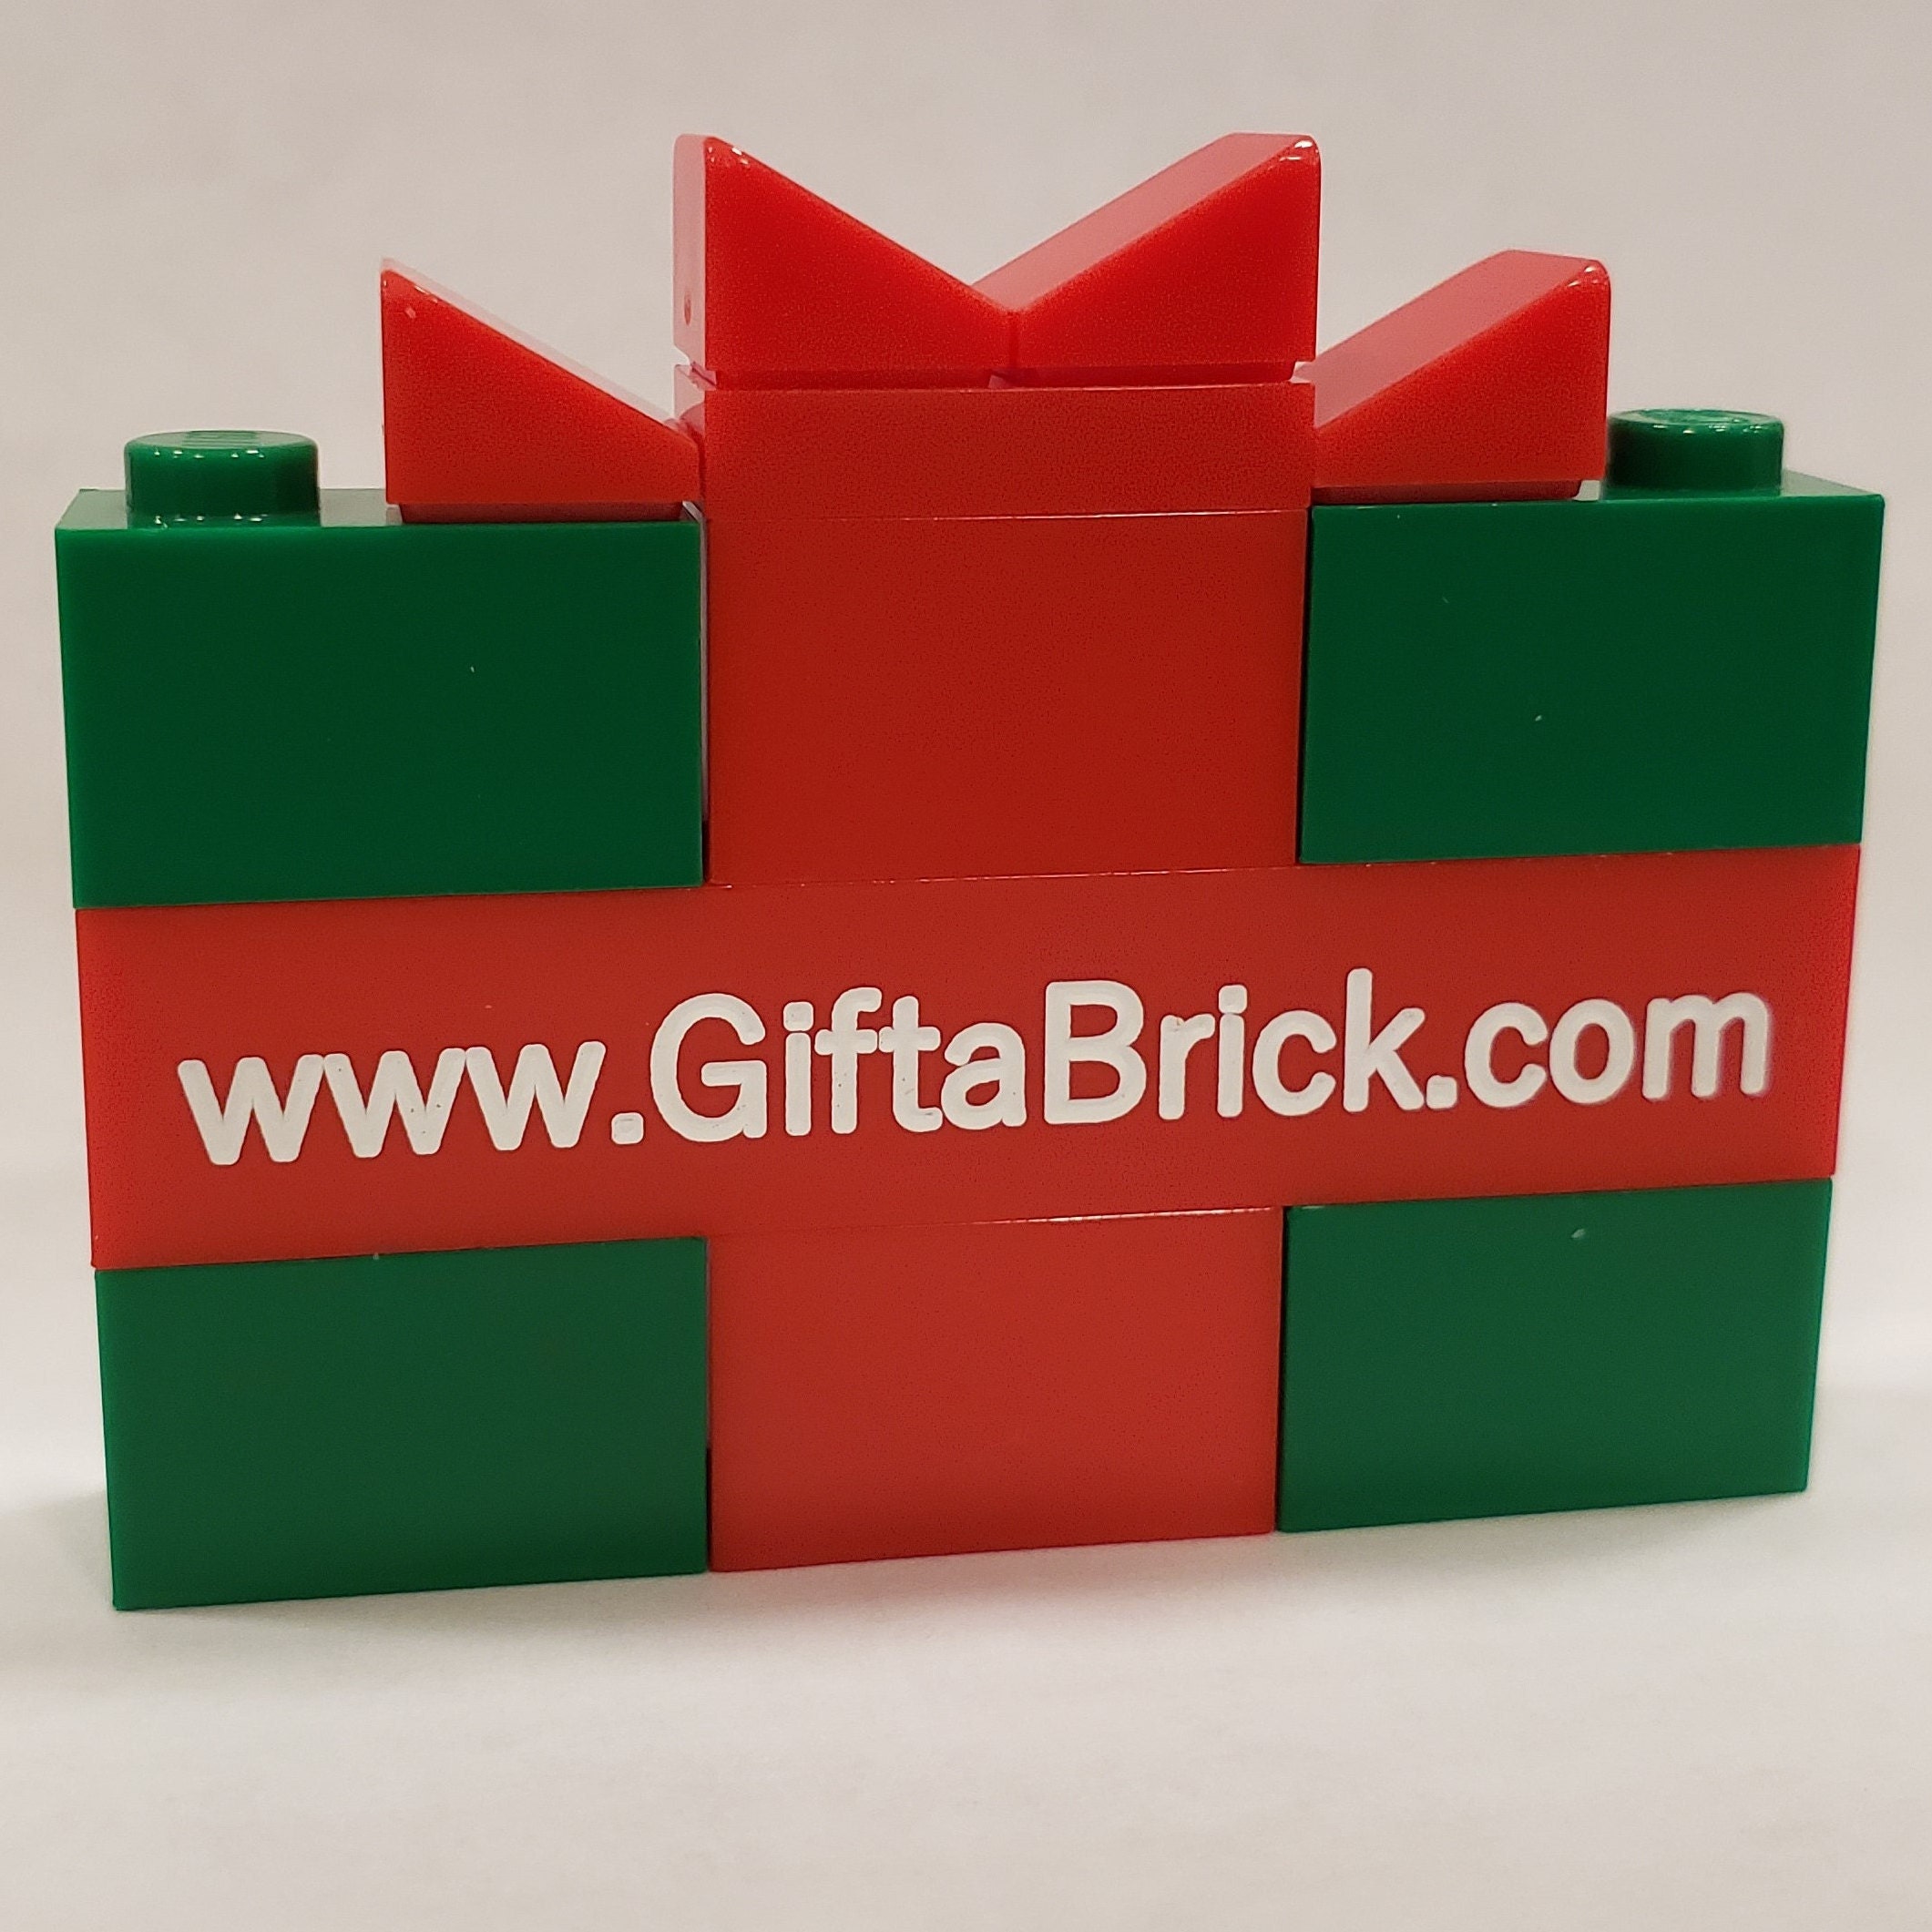 Fun Custom LEGO gifts with a personalized touch. by GiftABrick